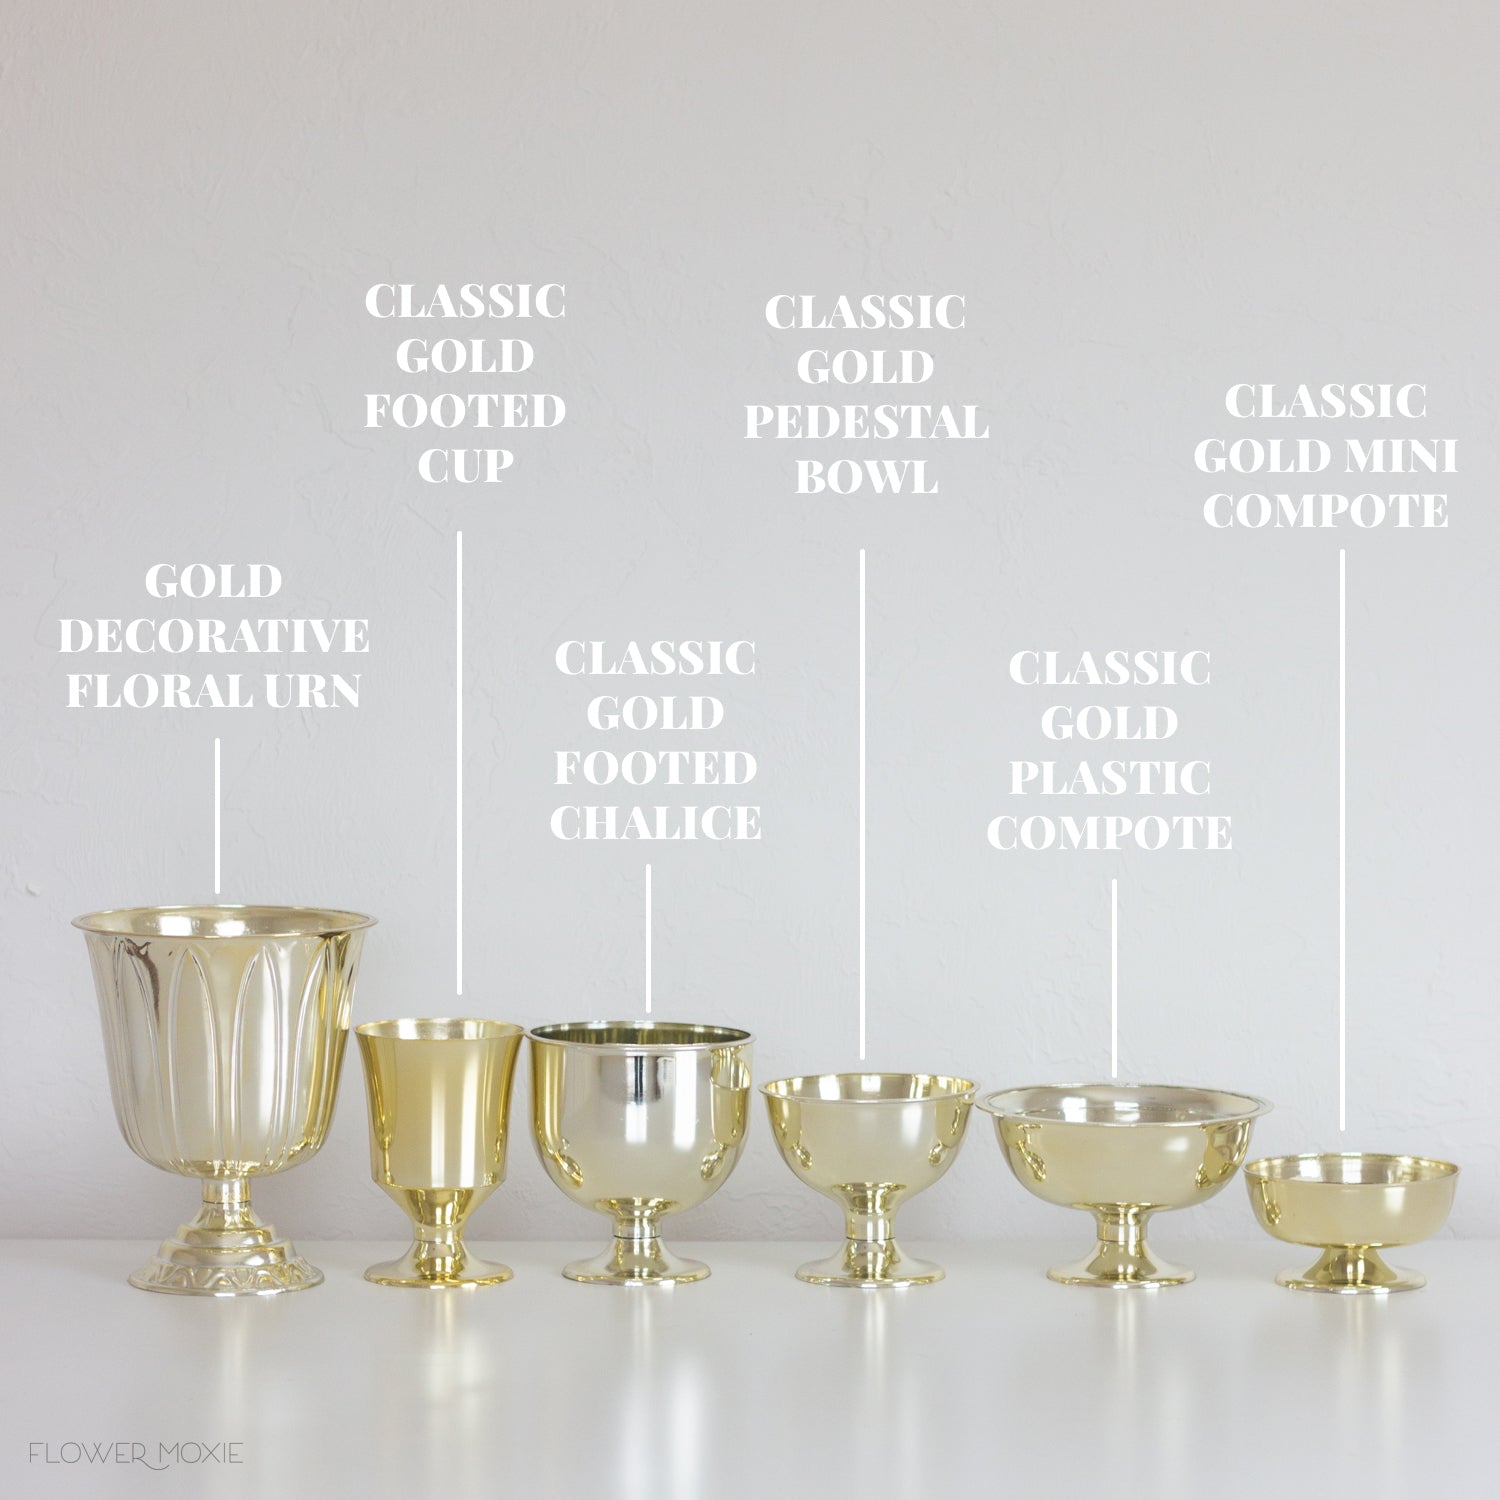 classic gold plastic vases labeled